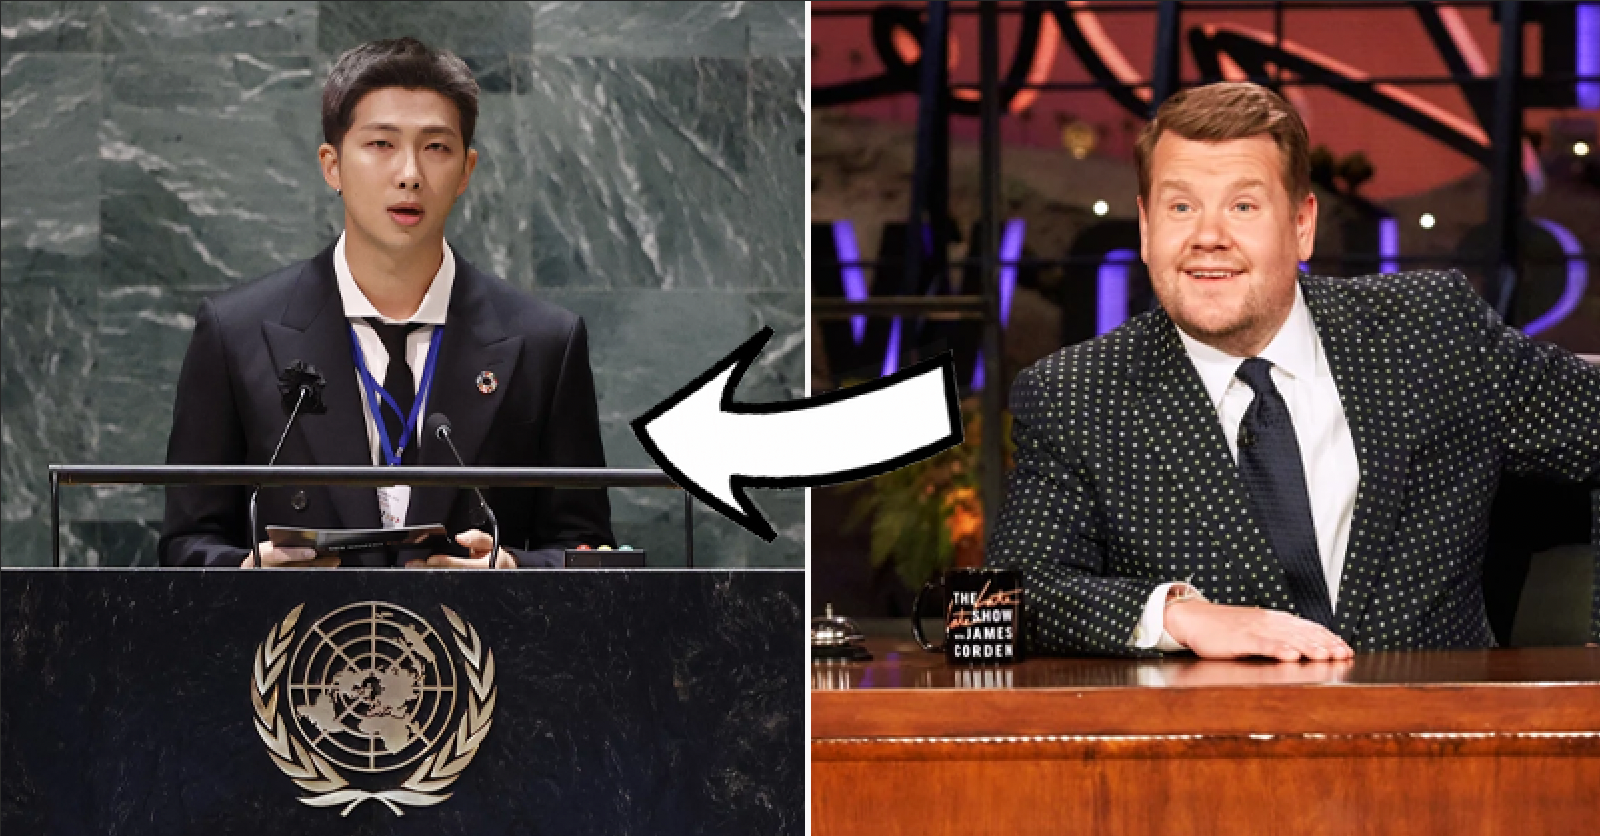 James Corden Trends on Twitter after His Comment About BTS at UNGA